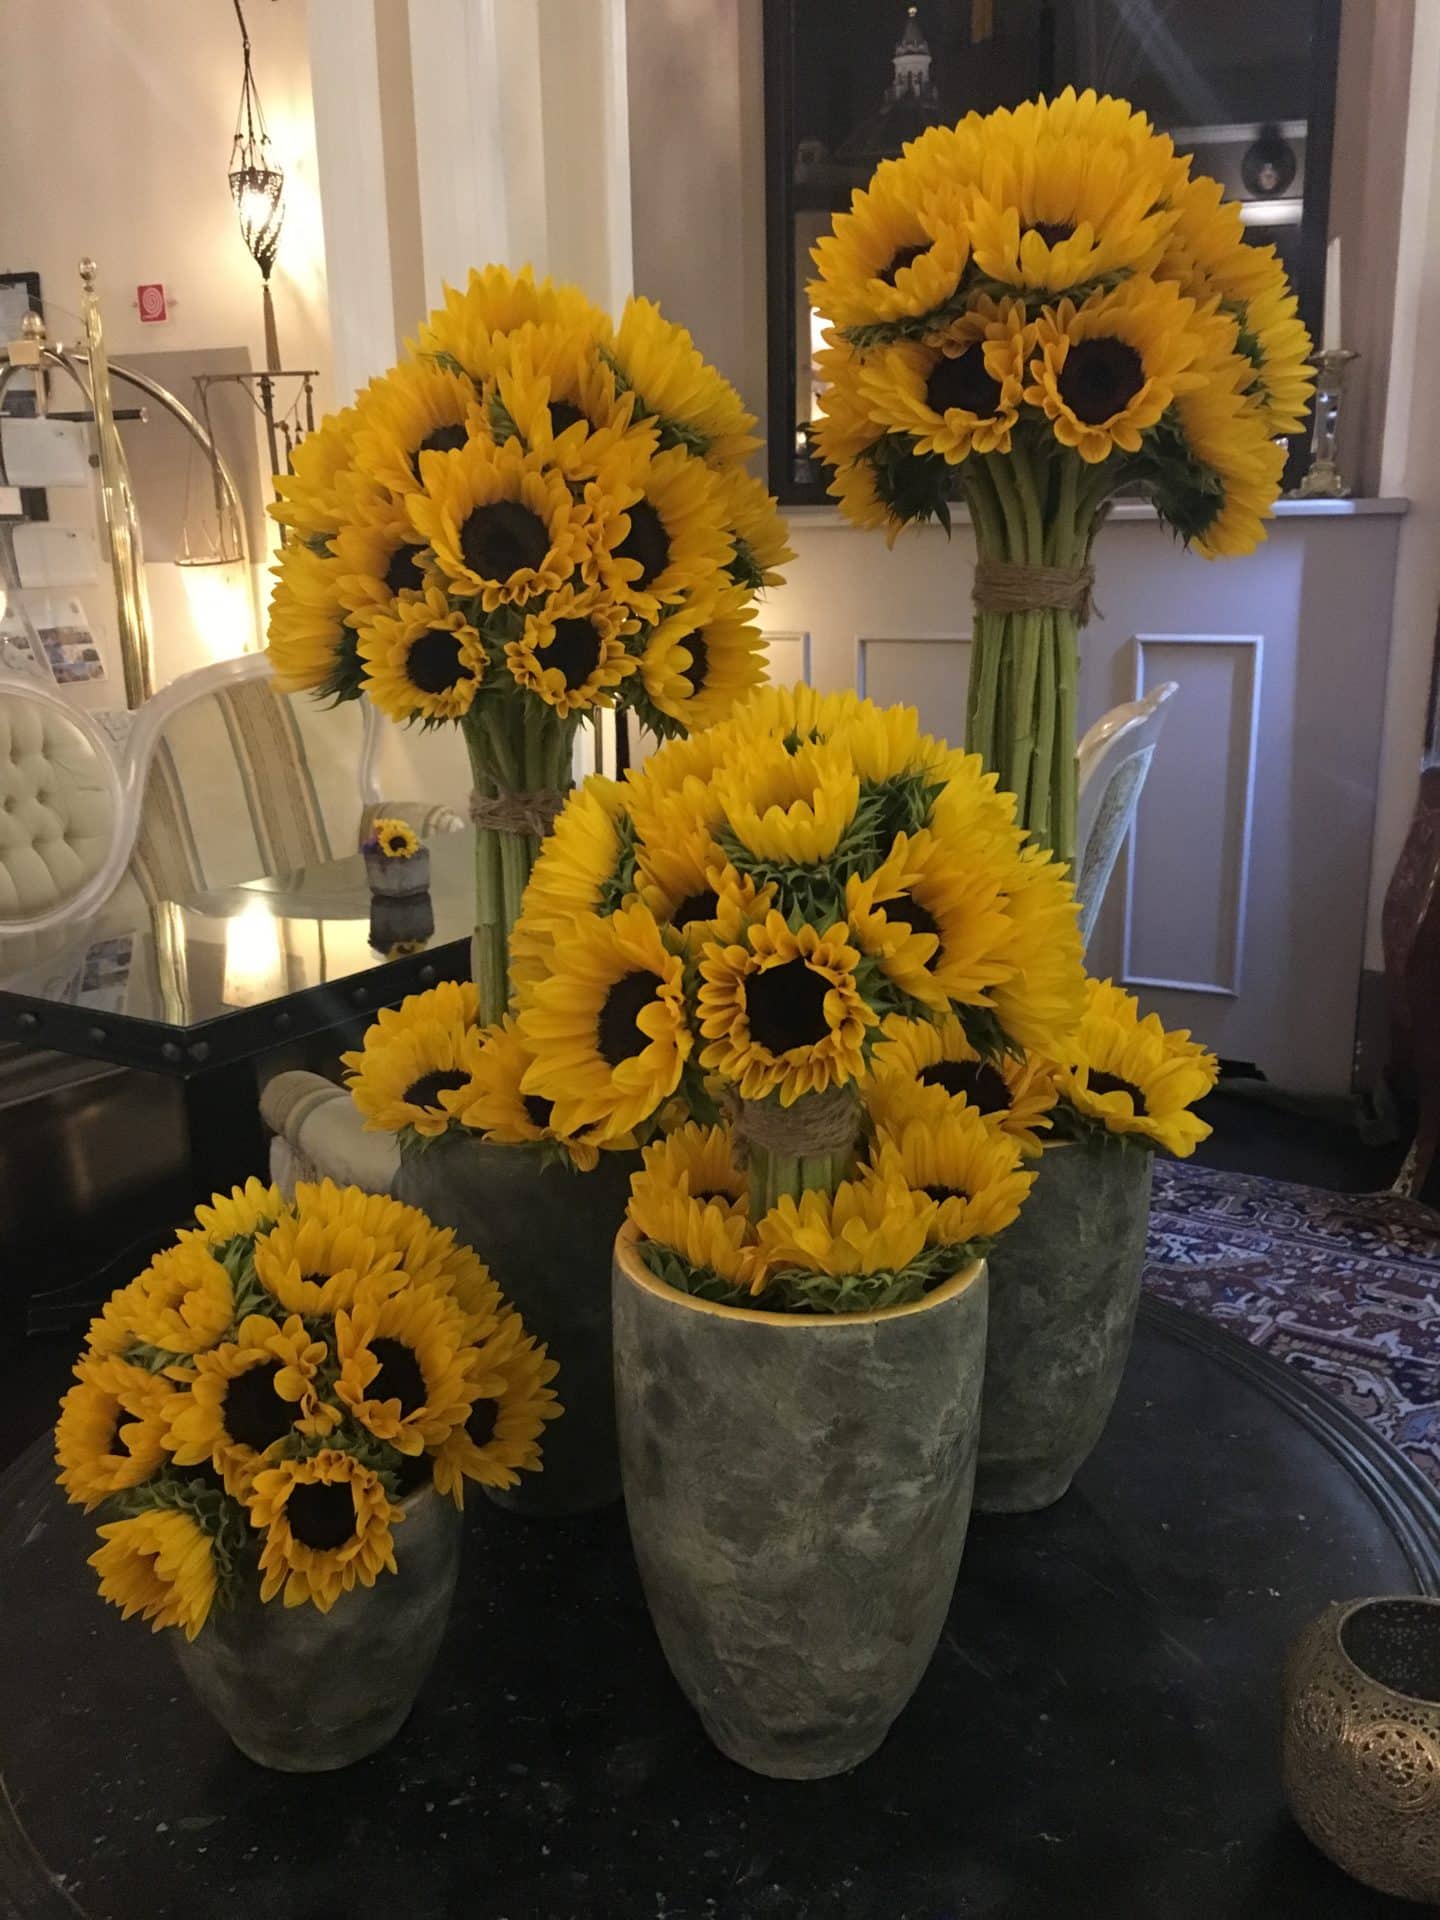 The Opulent Bernini Palace Hotel sunflowers in lobby. 5 vases in the hotel lobby with large bunches of sunflower arrangements. 